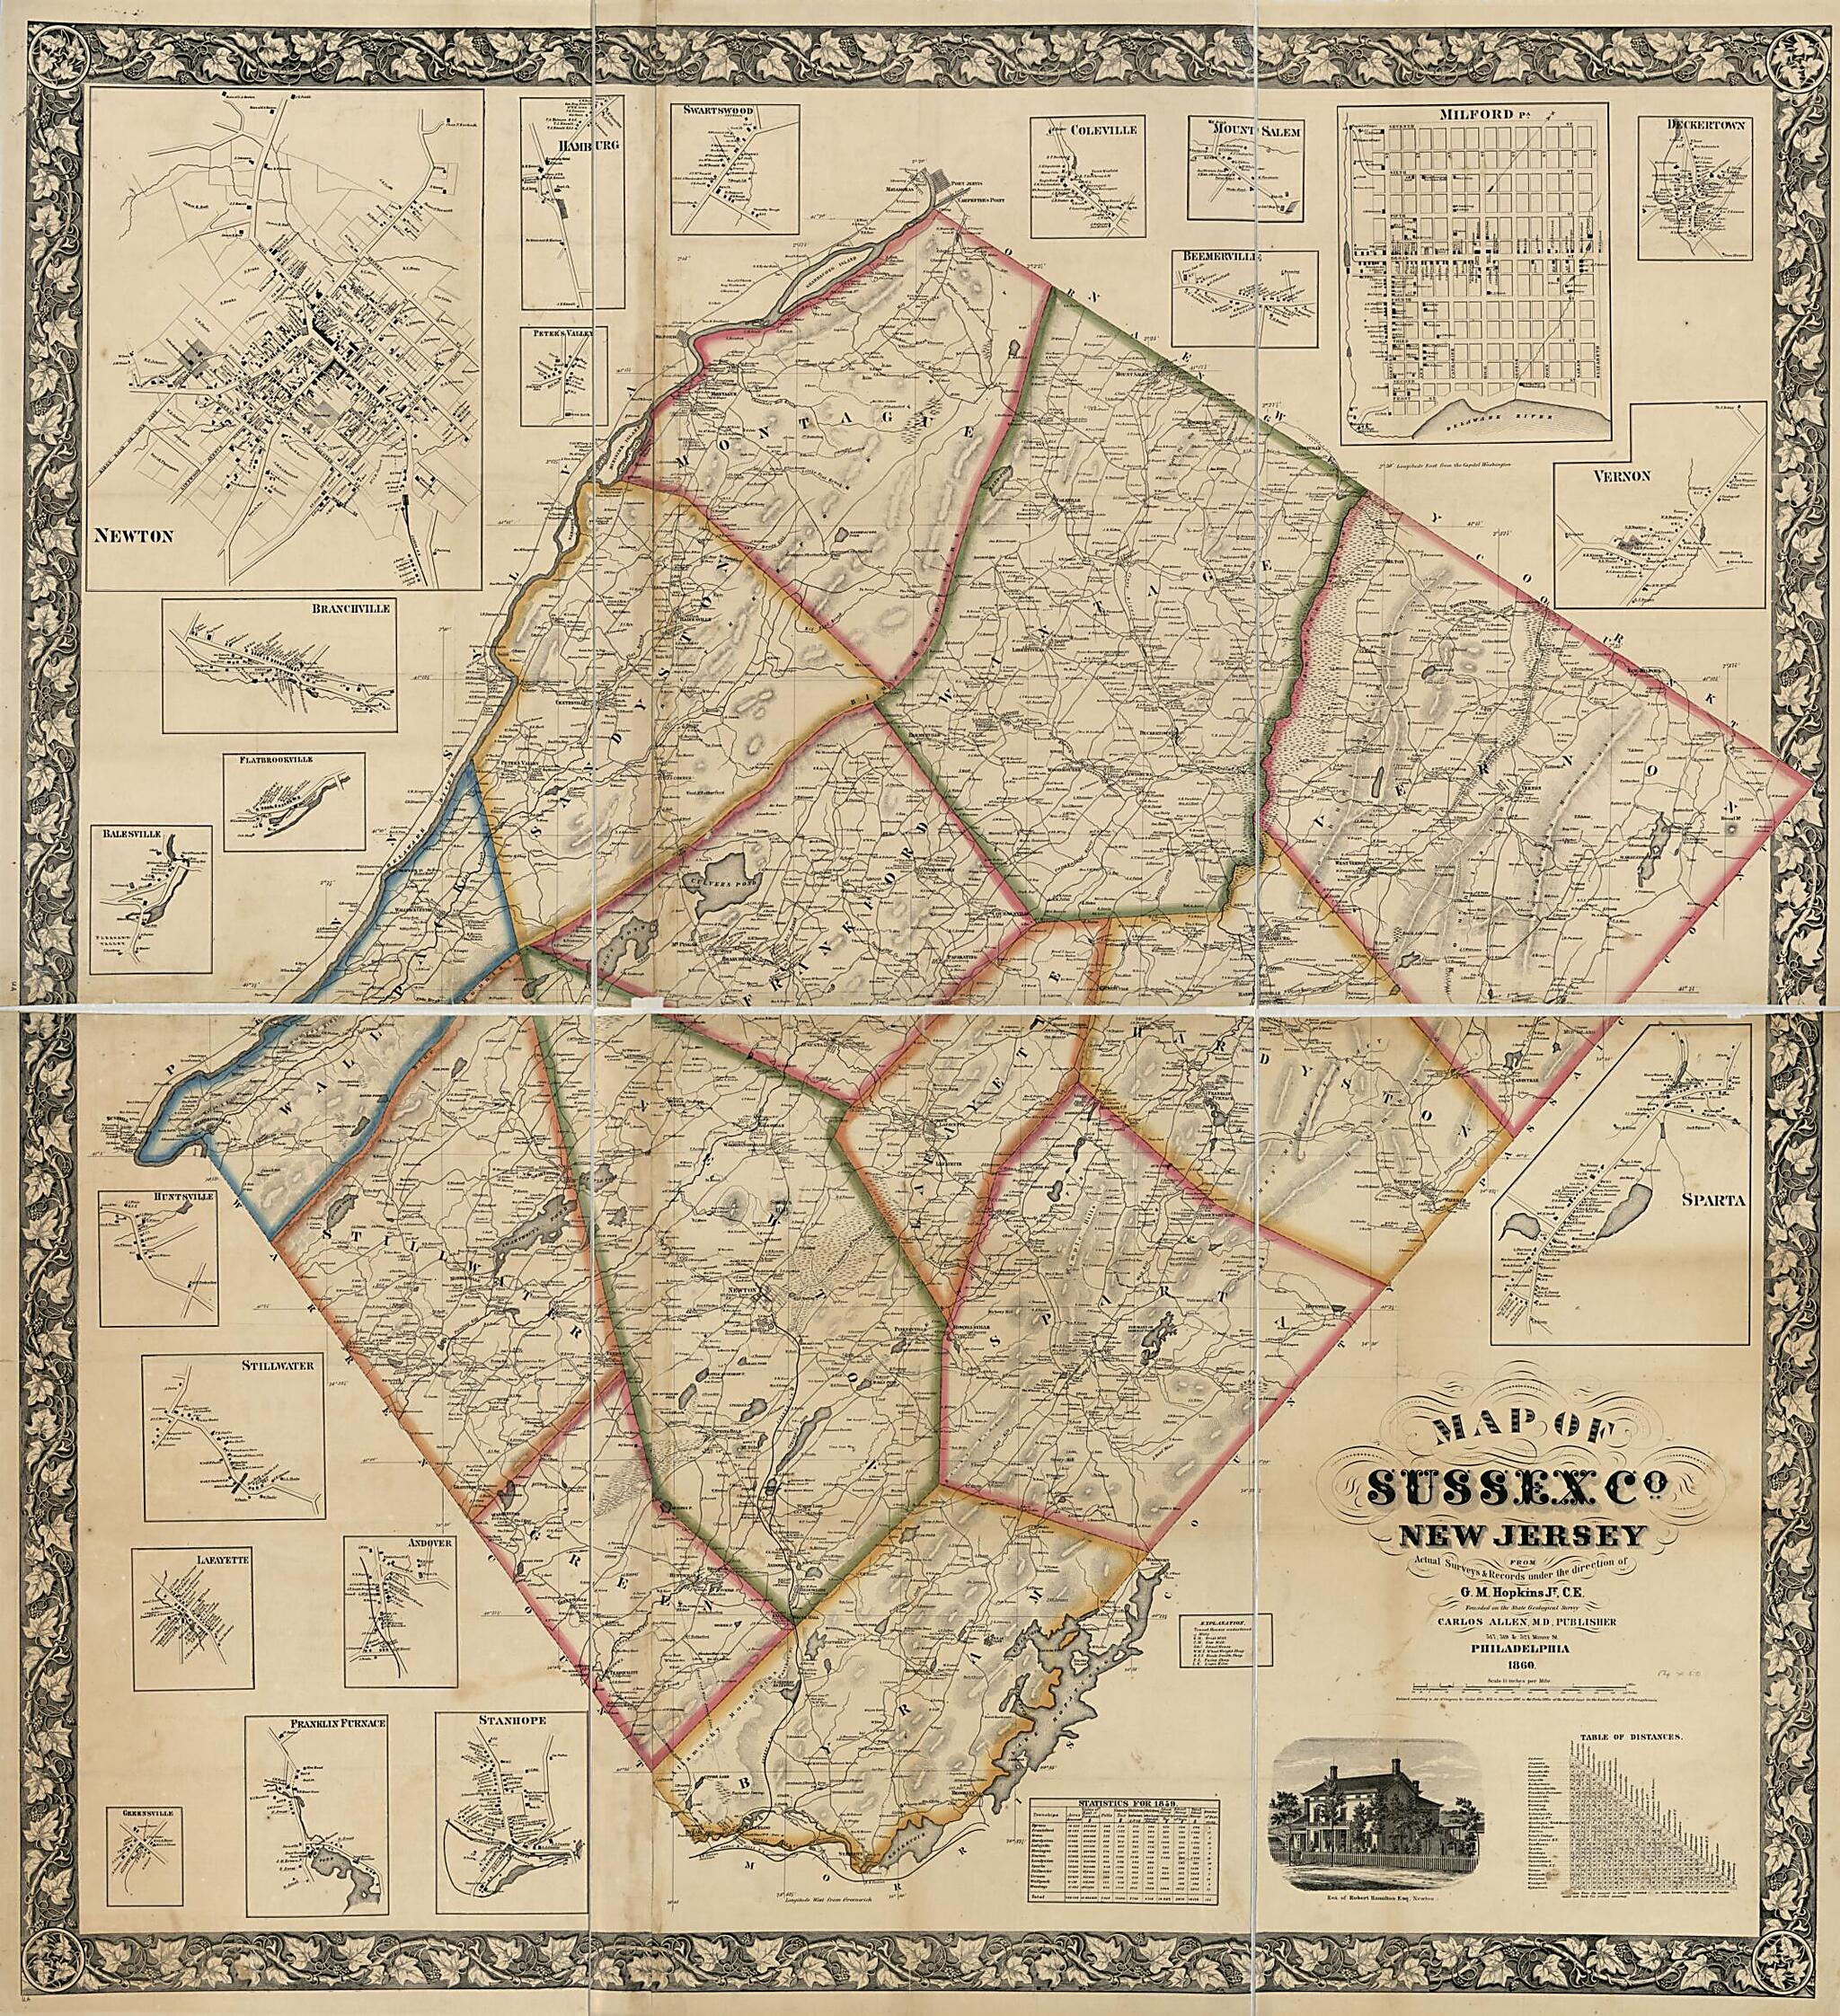 This old map of Map of Sussex County, New Jersey : from Actual Surveys &amp; Records (Map of Sussex County, New Jersey) from 1860 was created by Carlos Allen, Griffith Morgan Hopkins in 1860